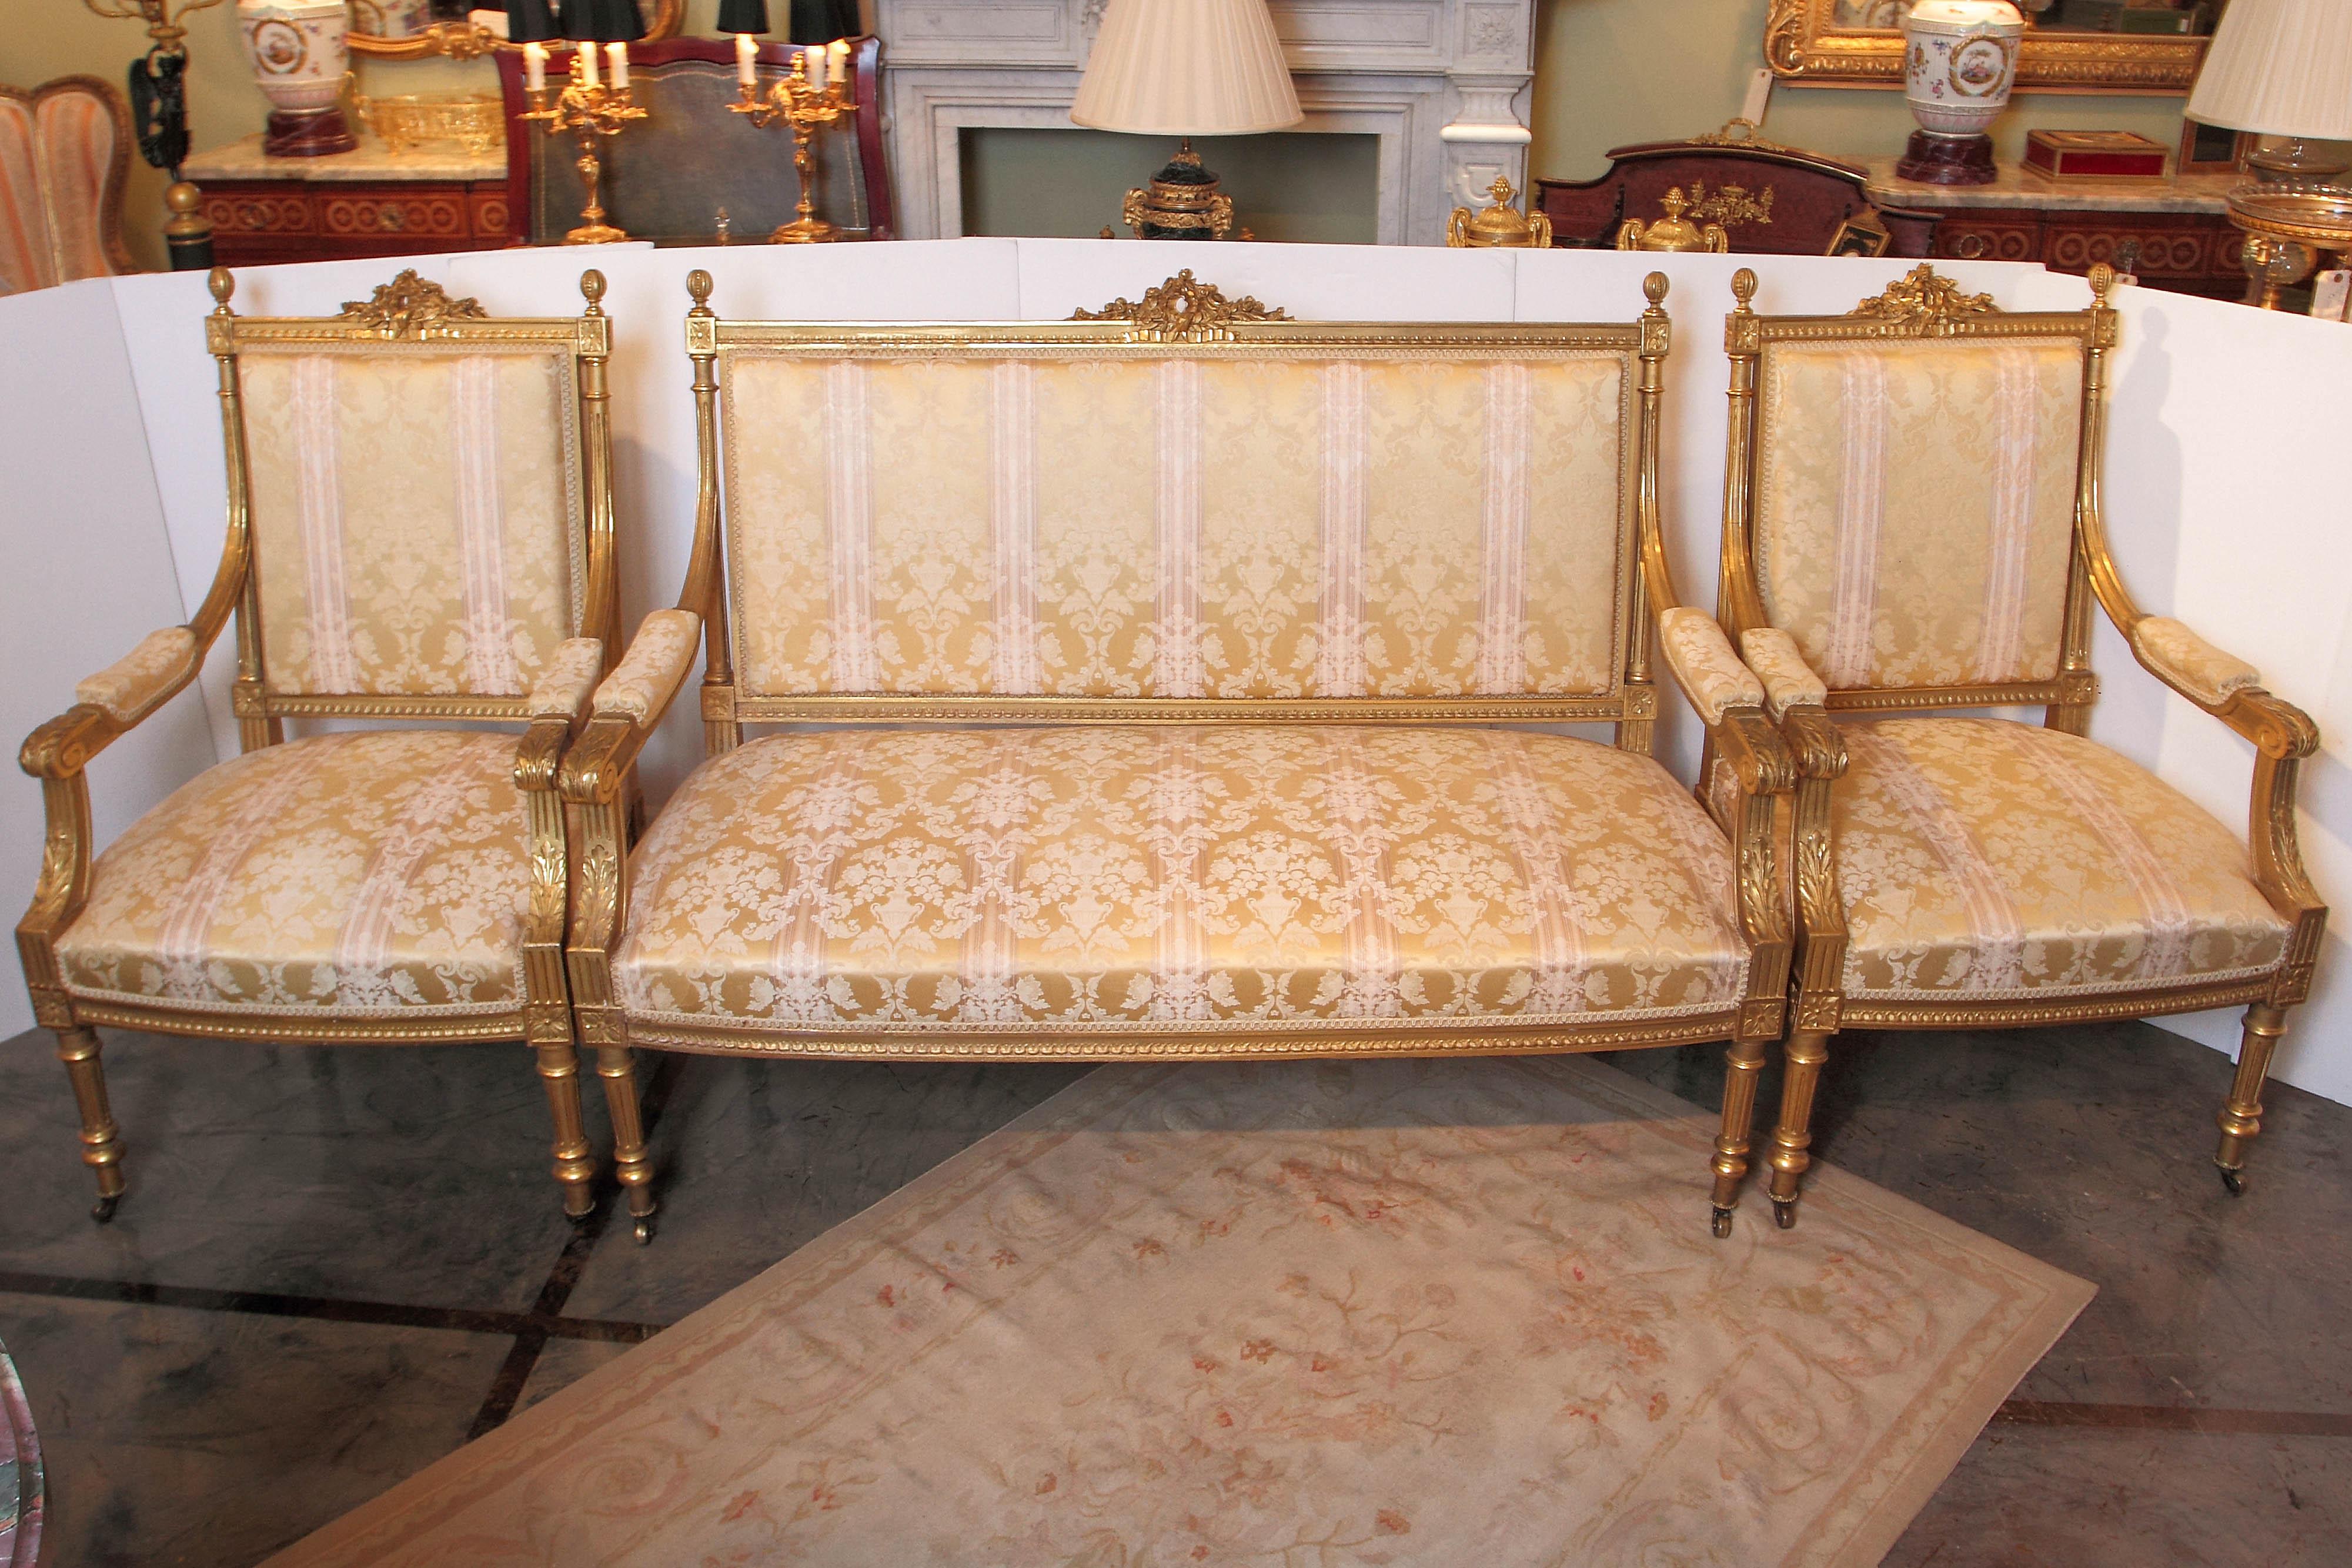 Fine quality 19th century French Louis XVI water gilt settee and chairs. Finest quality carving and gilding. From a prominent estate in the Hamptons New York.